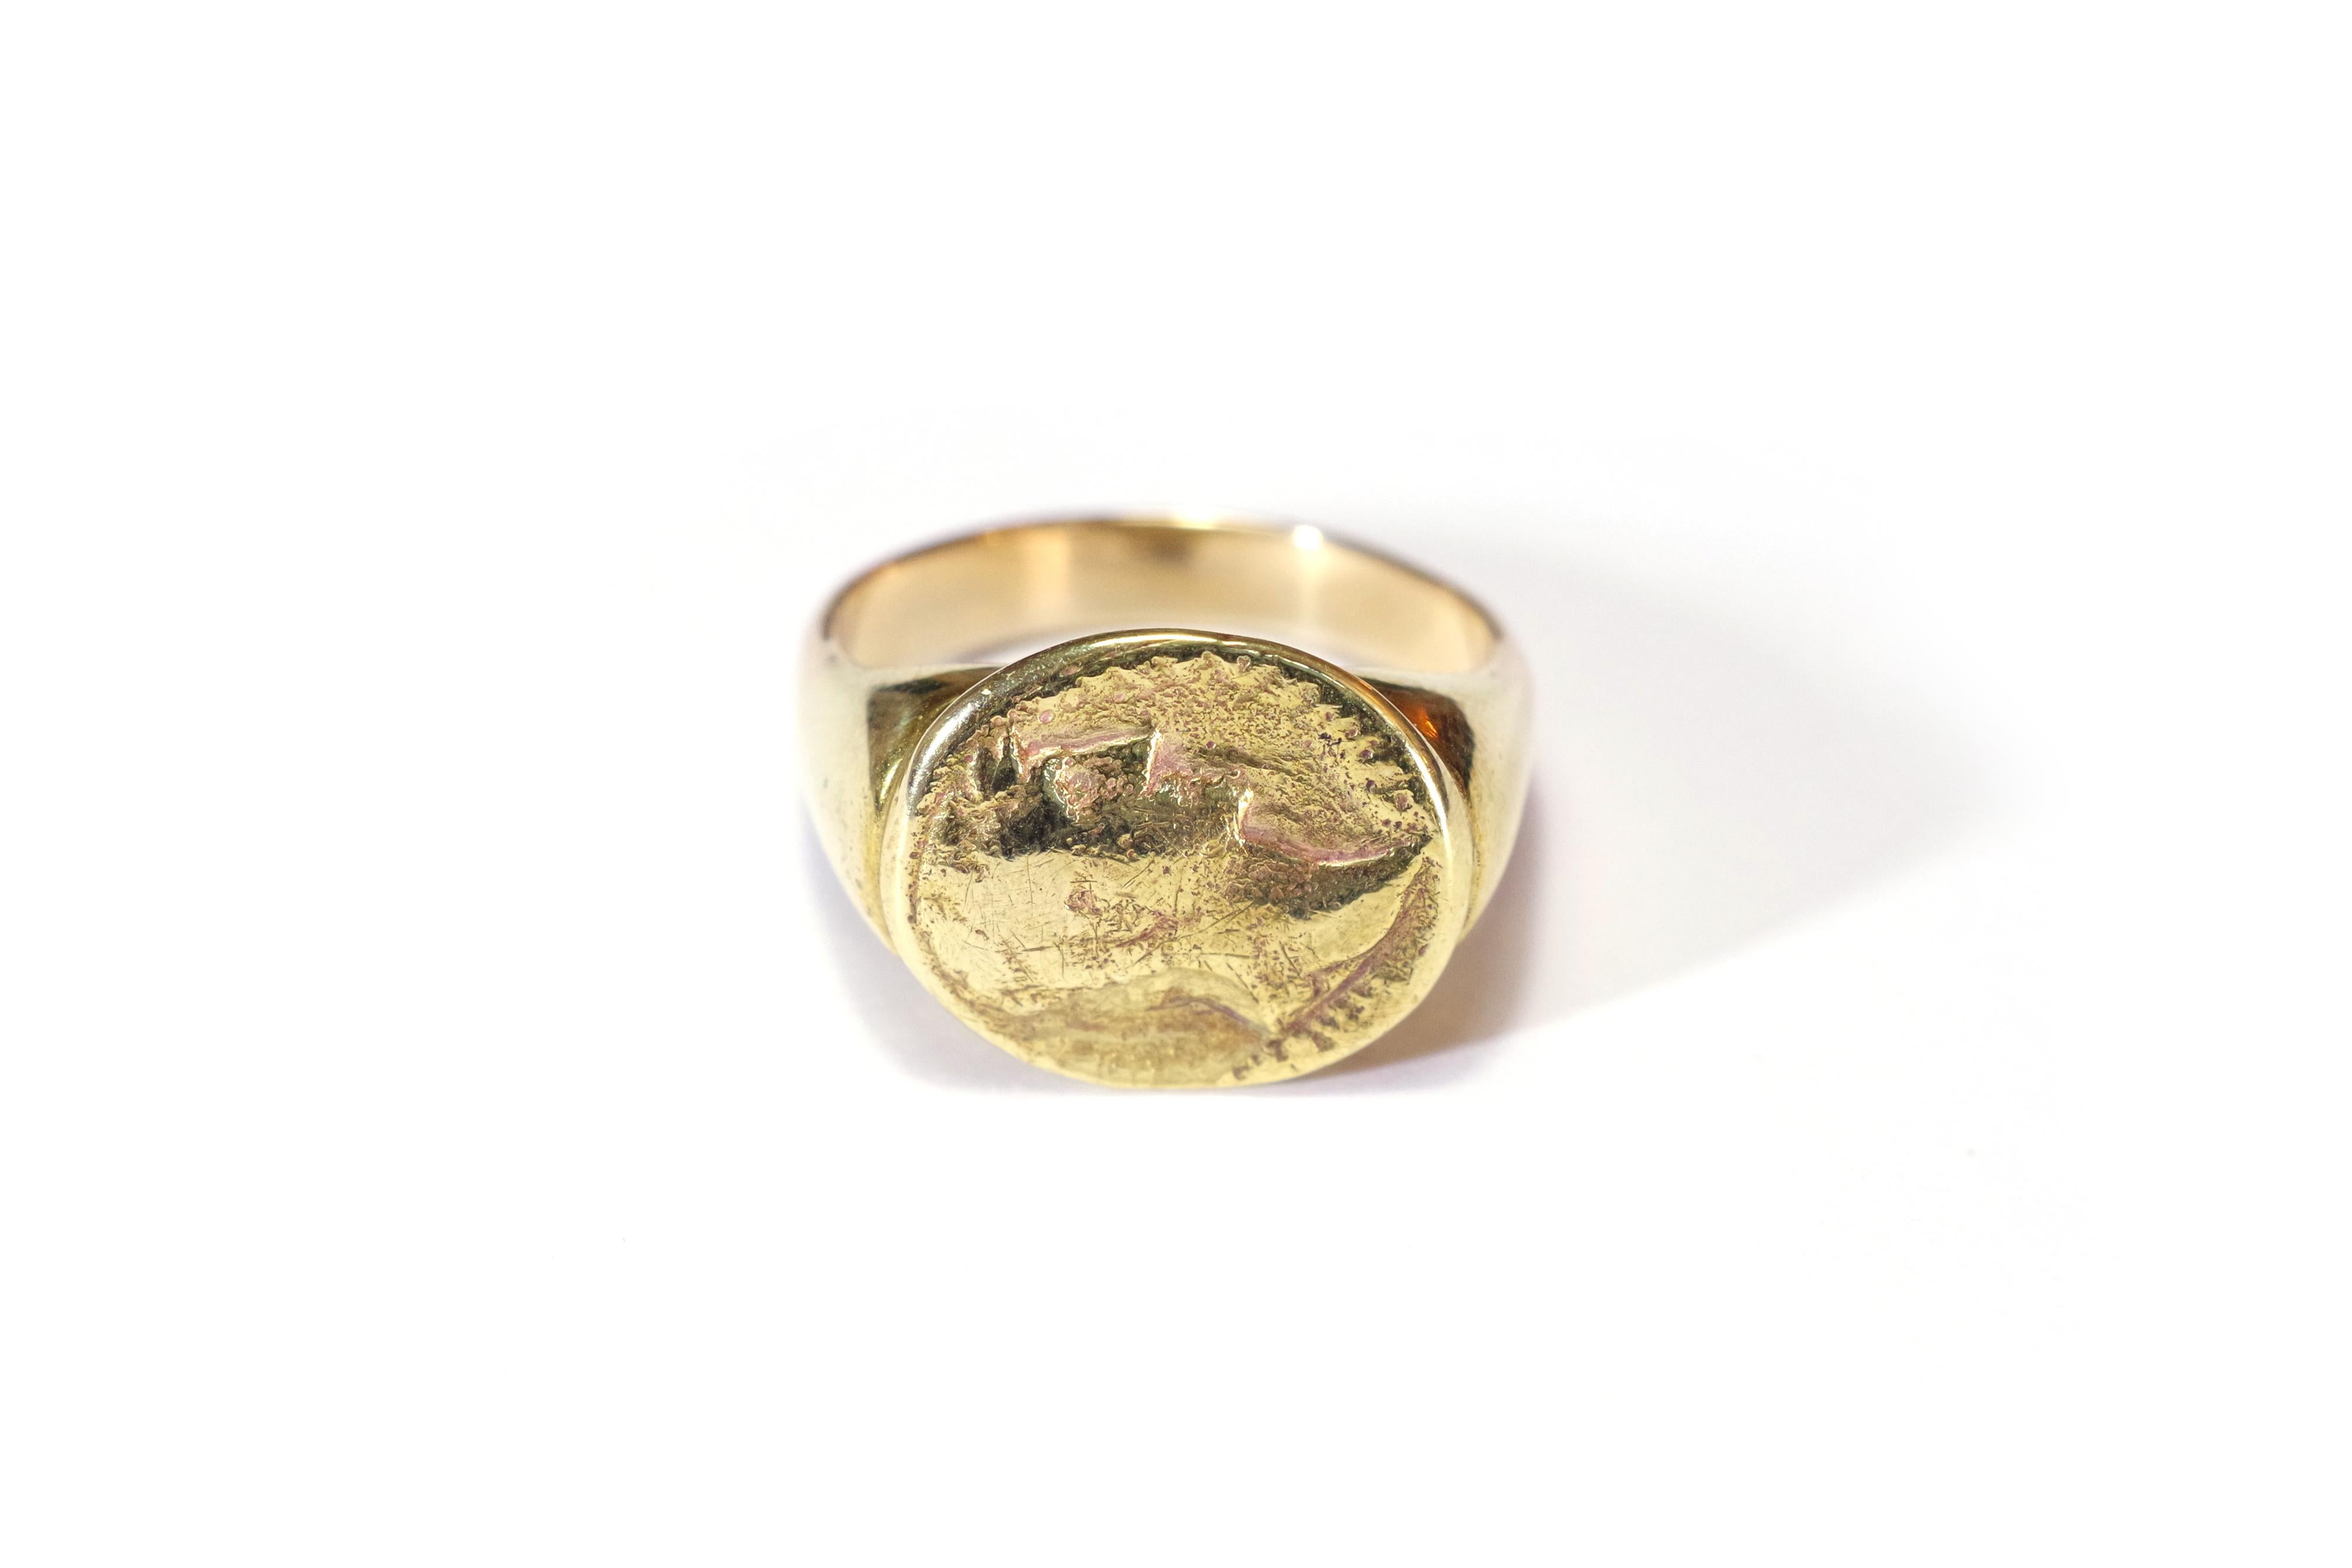 Antique cameo ring gold and bronze, the ring in gold 18 karats. The oval bezel is in gilt bronze. It is decorated with a man in profile, probably a Roman emperor, in an entourage of writing, now illegible. The soulders and ring is made of 18 karat